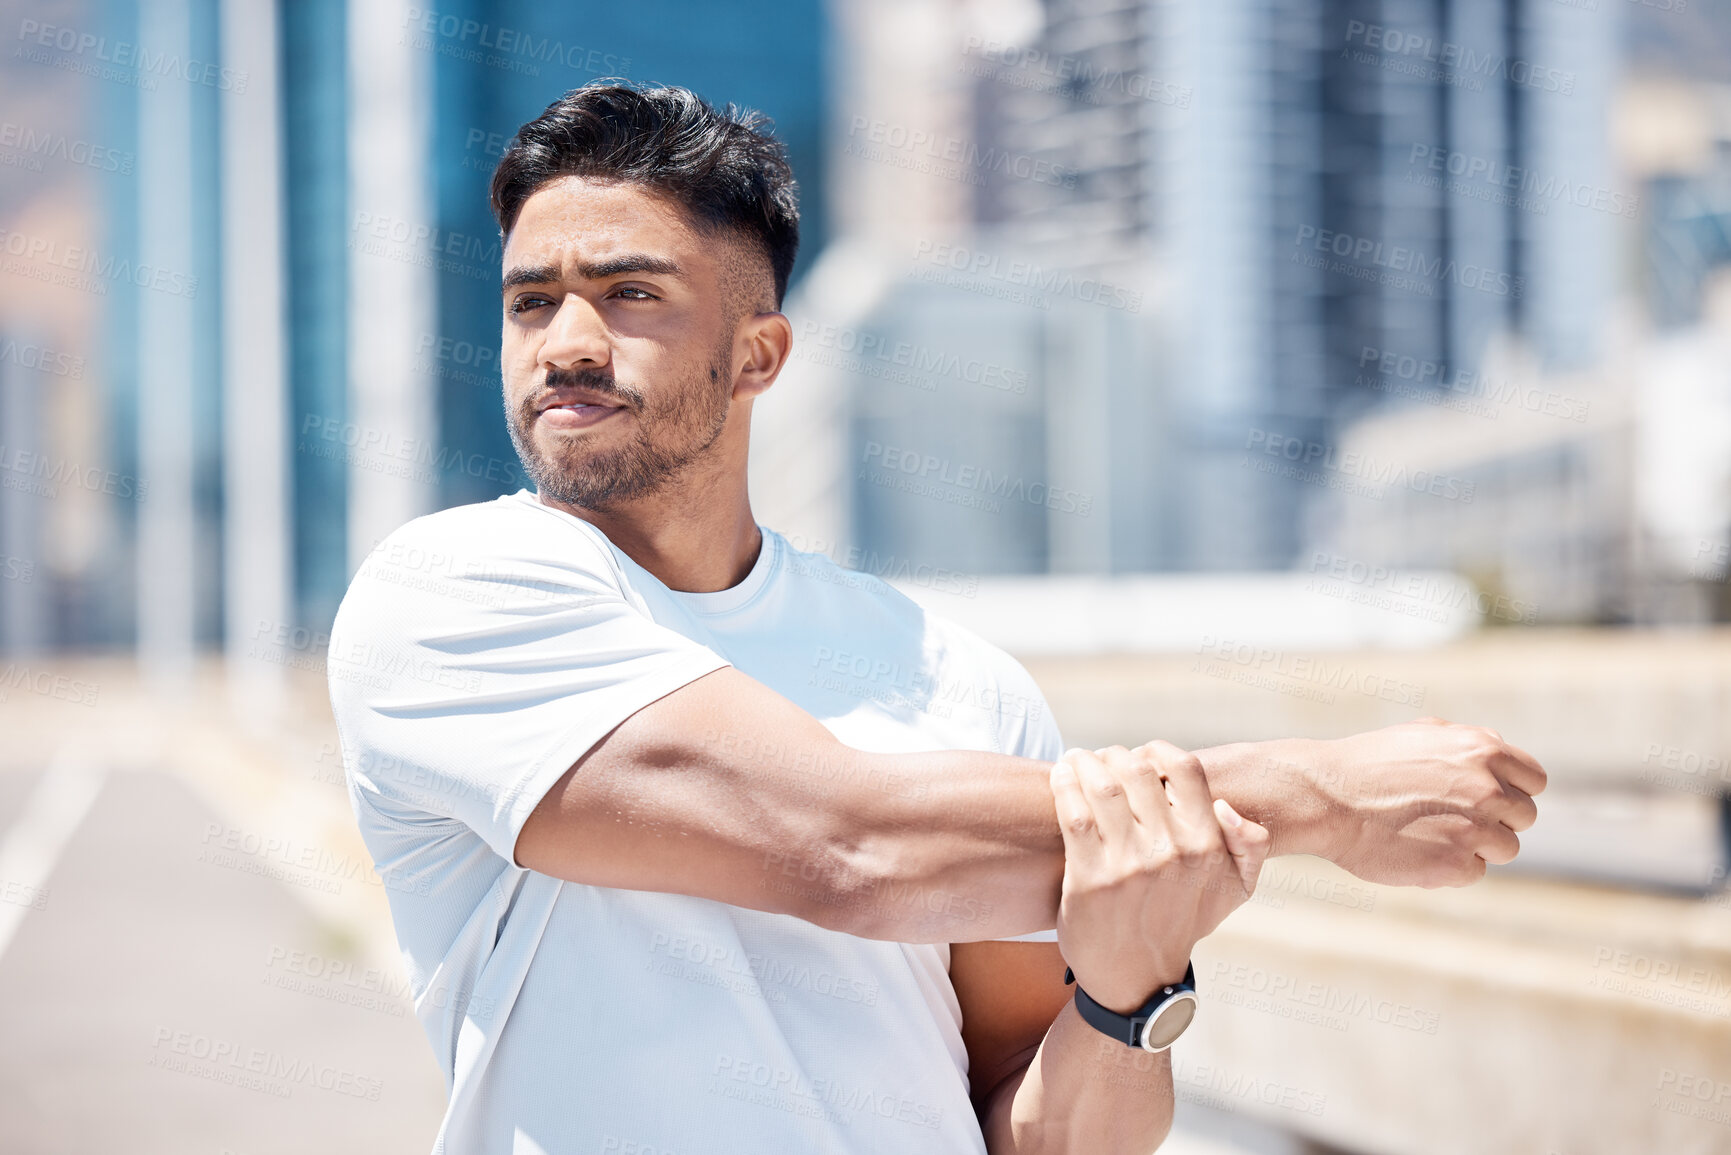 Buy stock photo Man, fitness and stretching arms in city for running, cardio workout or exercise in the outdoors. Fit, active or sporty male person, athlete or runner in warm up arm stretch before training in town